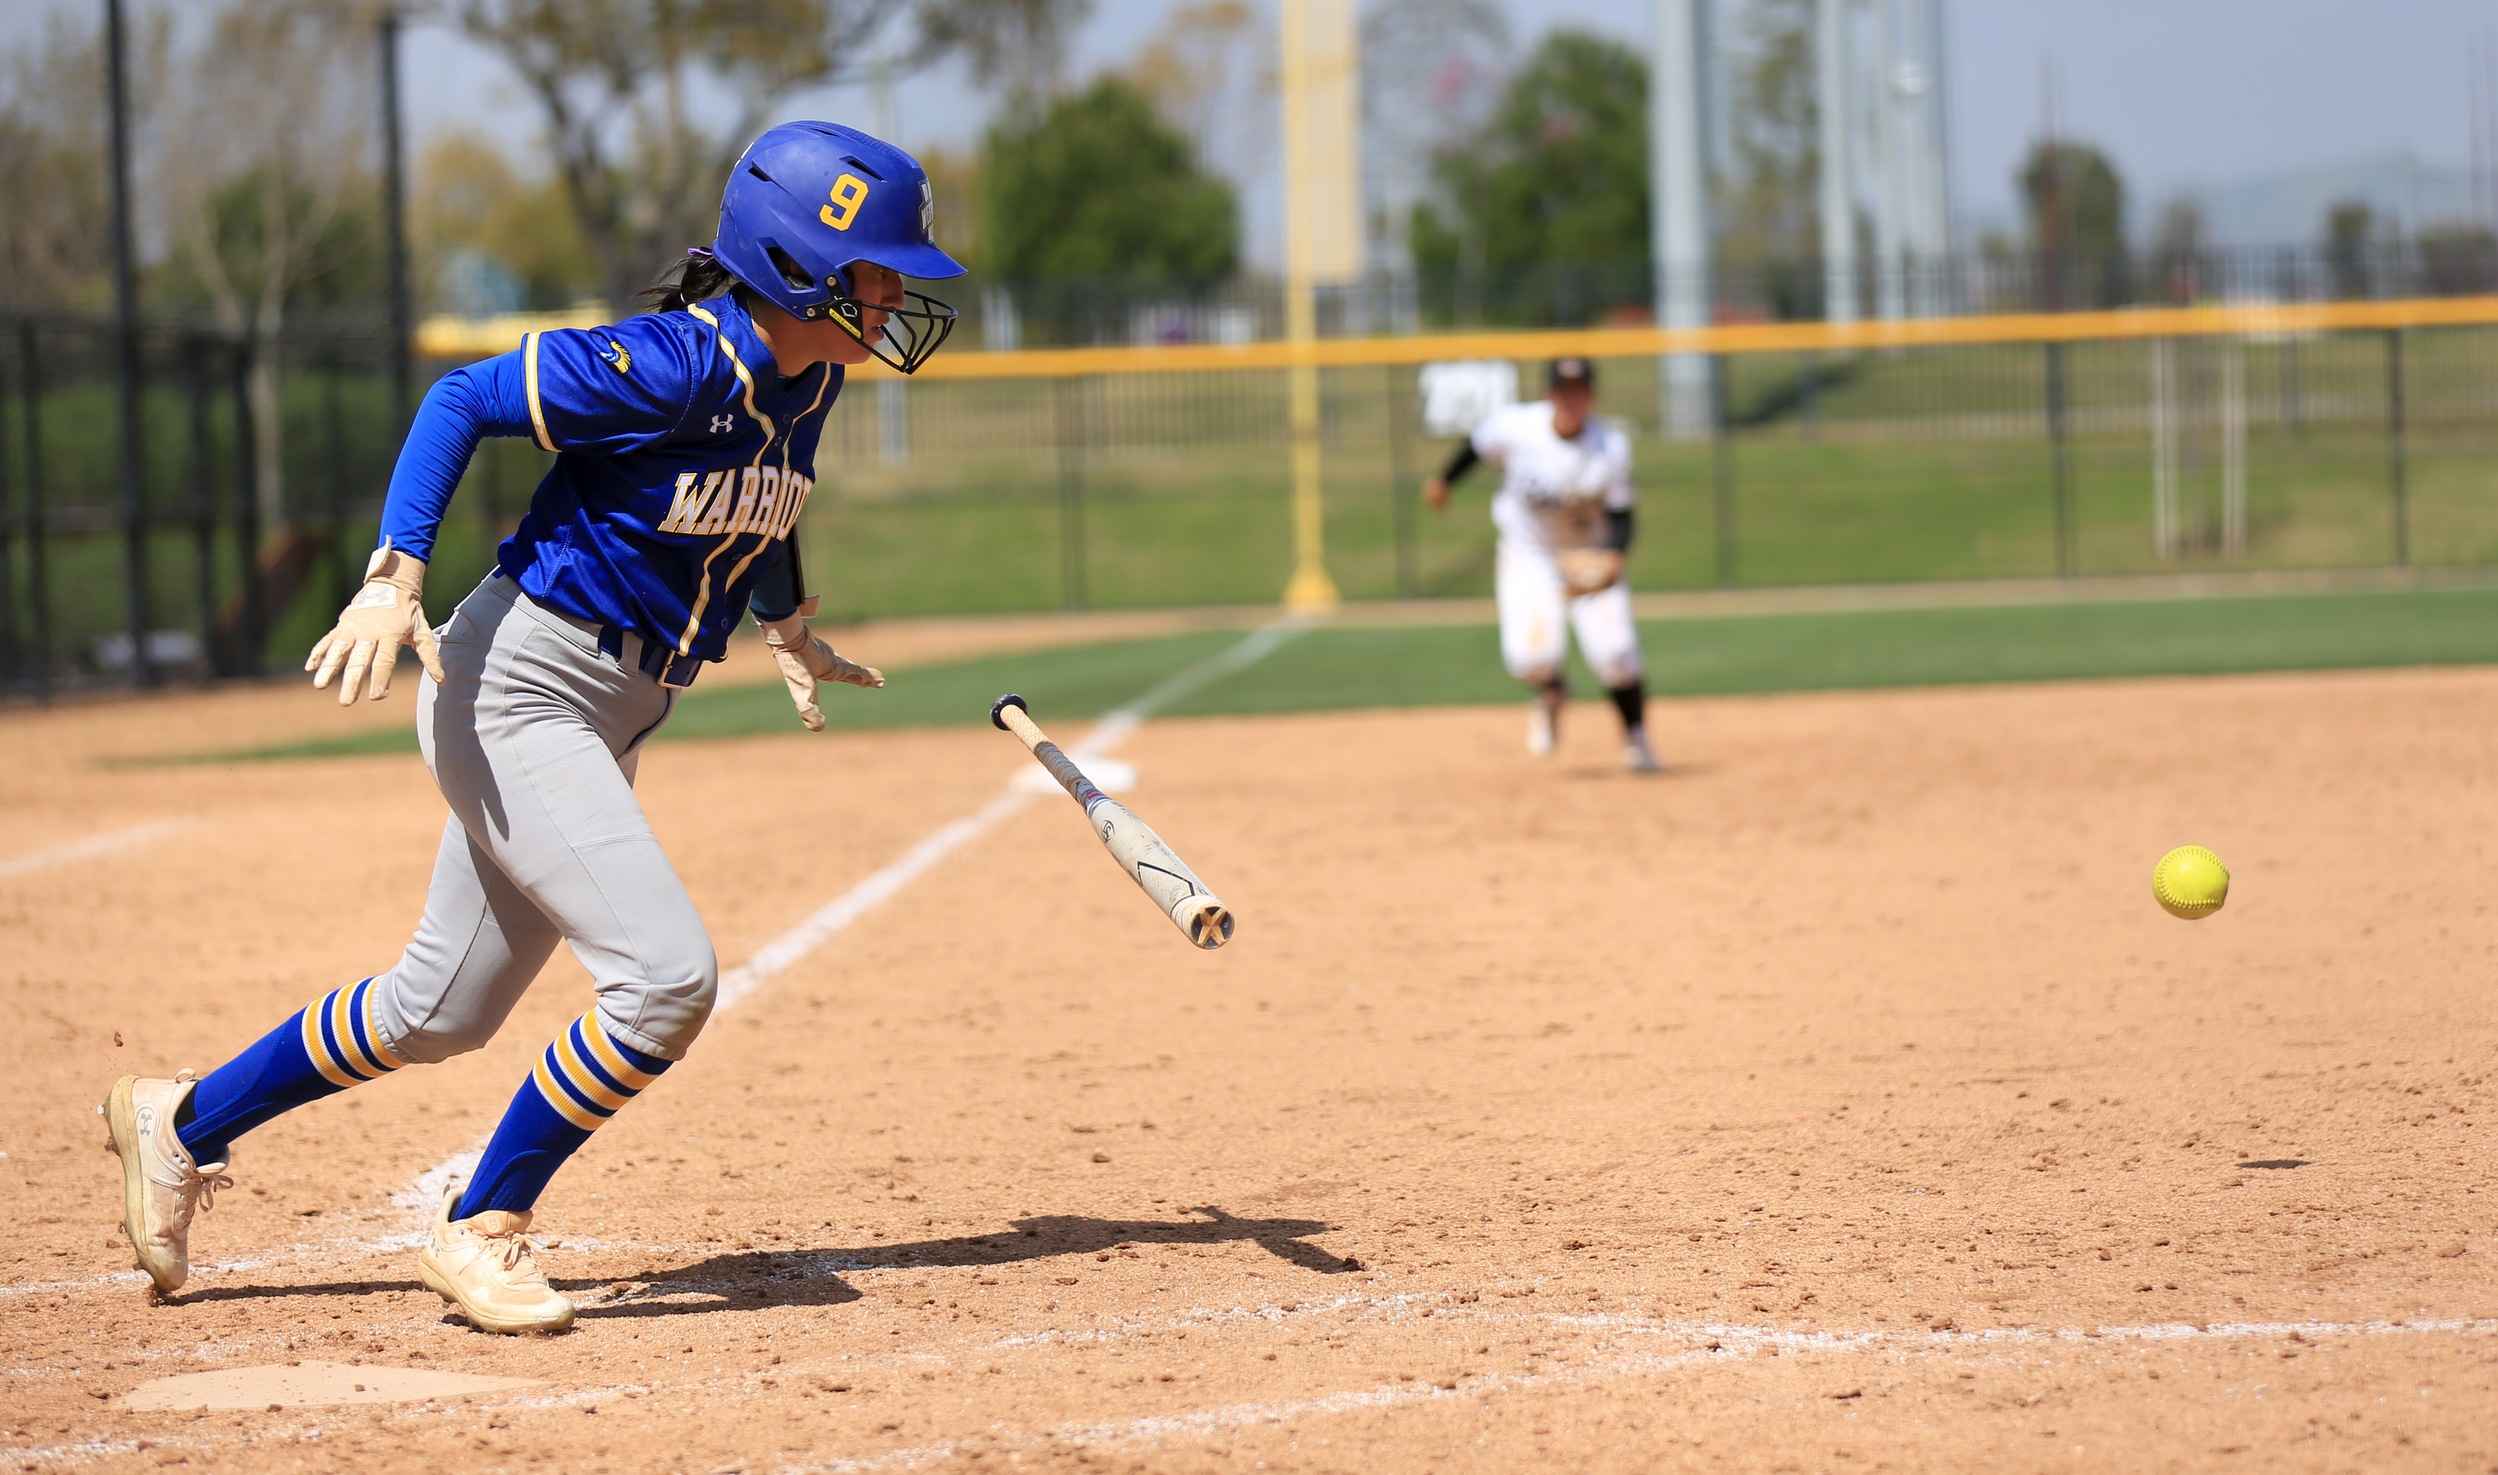 Kassandra Ramos lays down a bunt attempt in Game 2. Photo by Brandon Petersen.